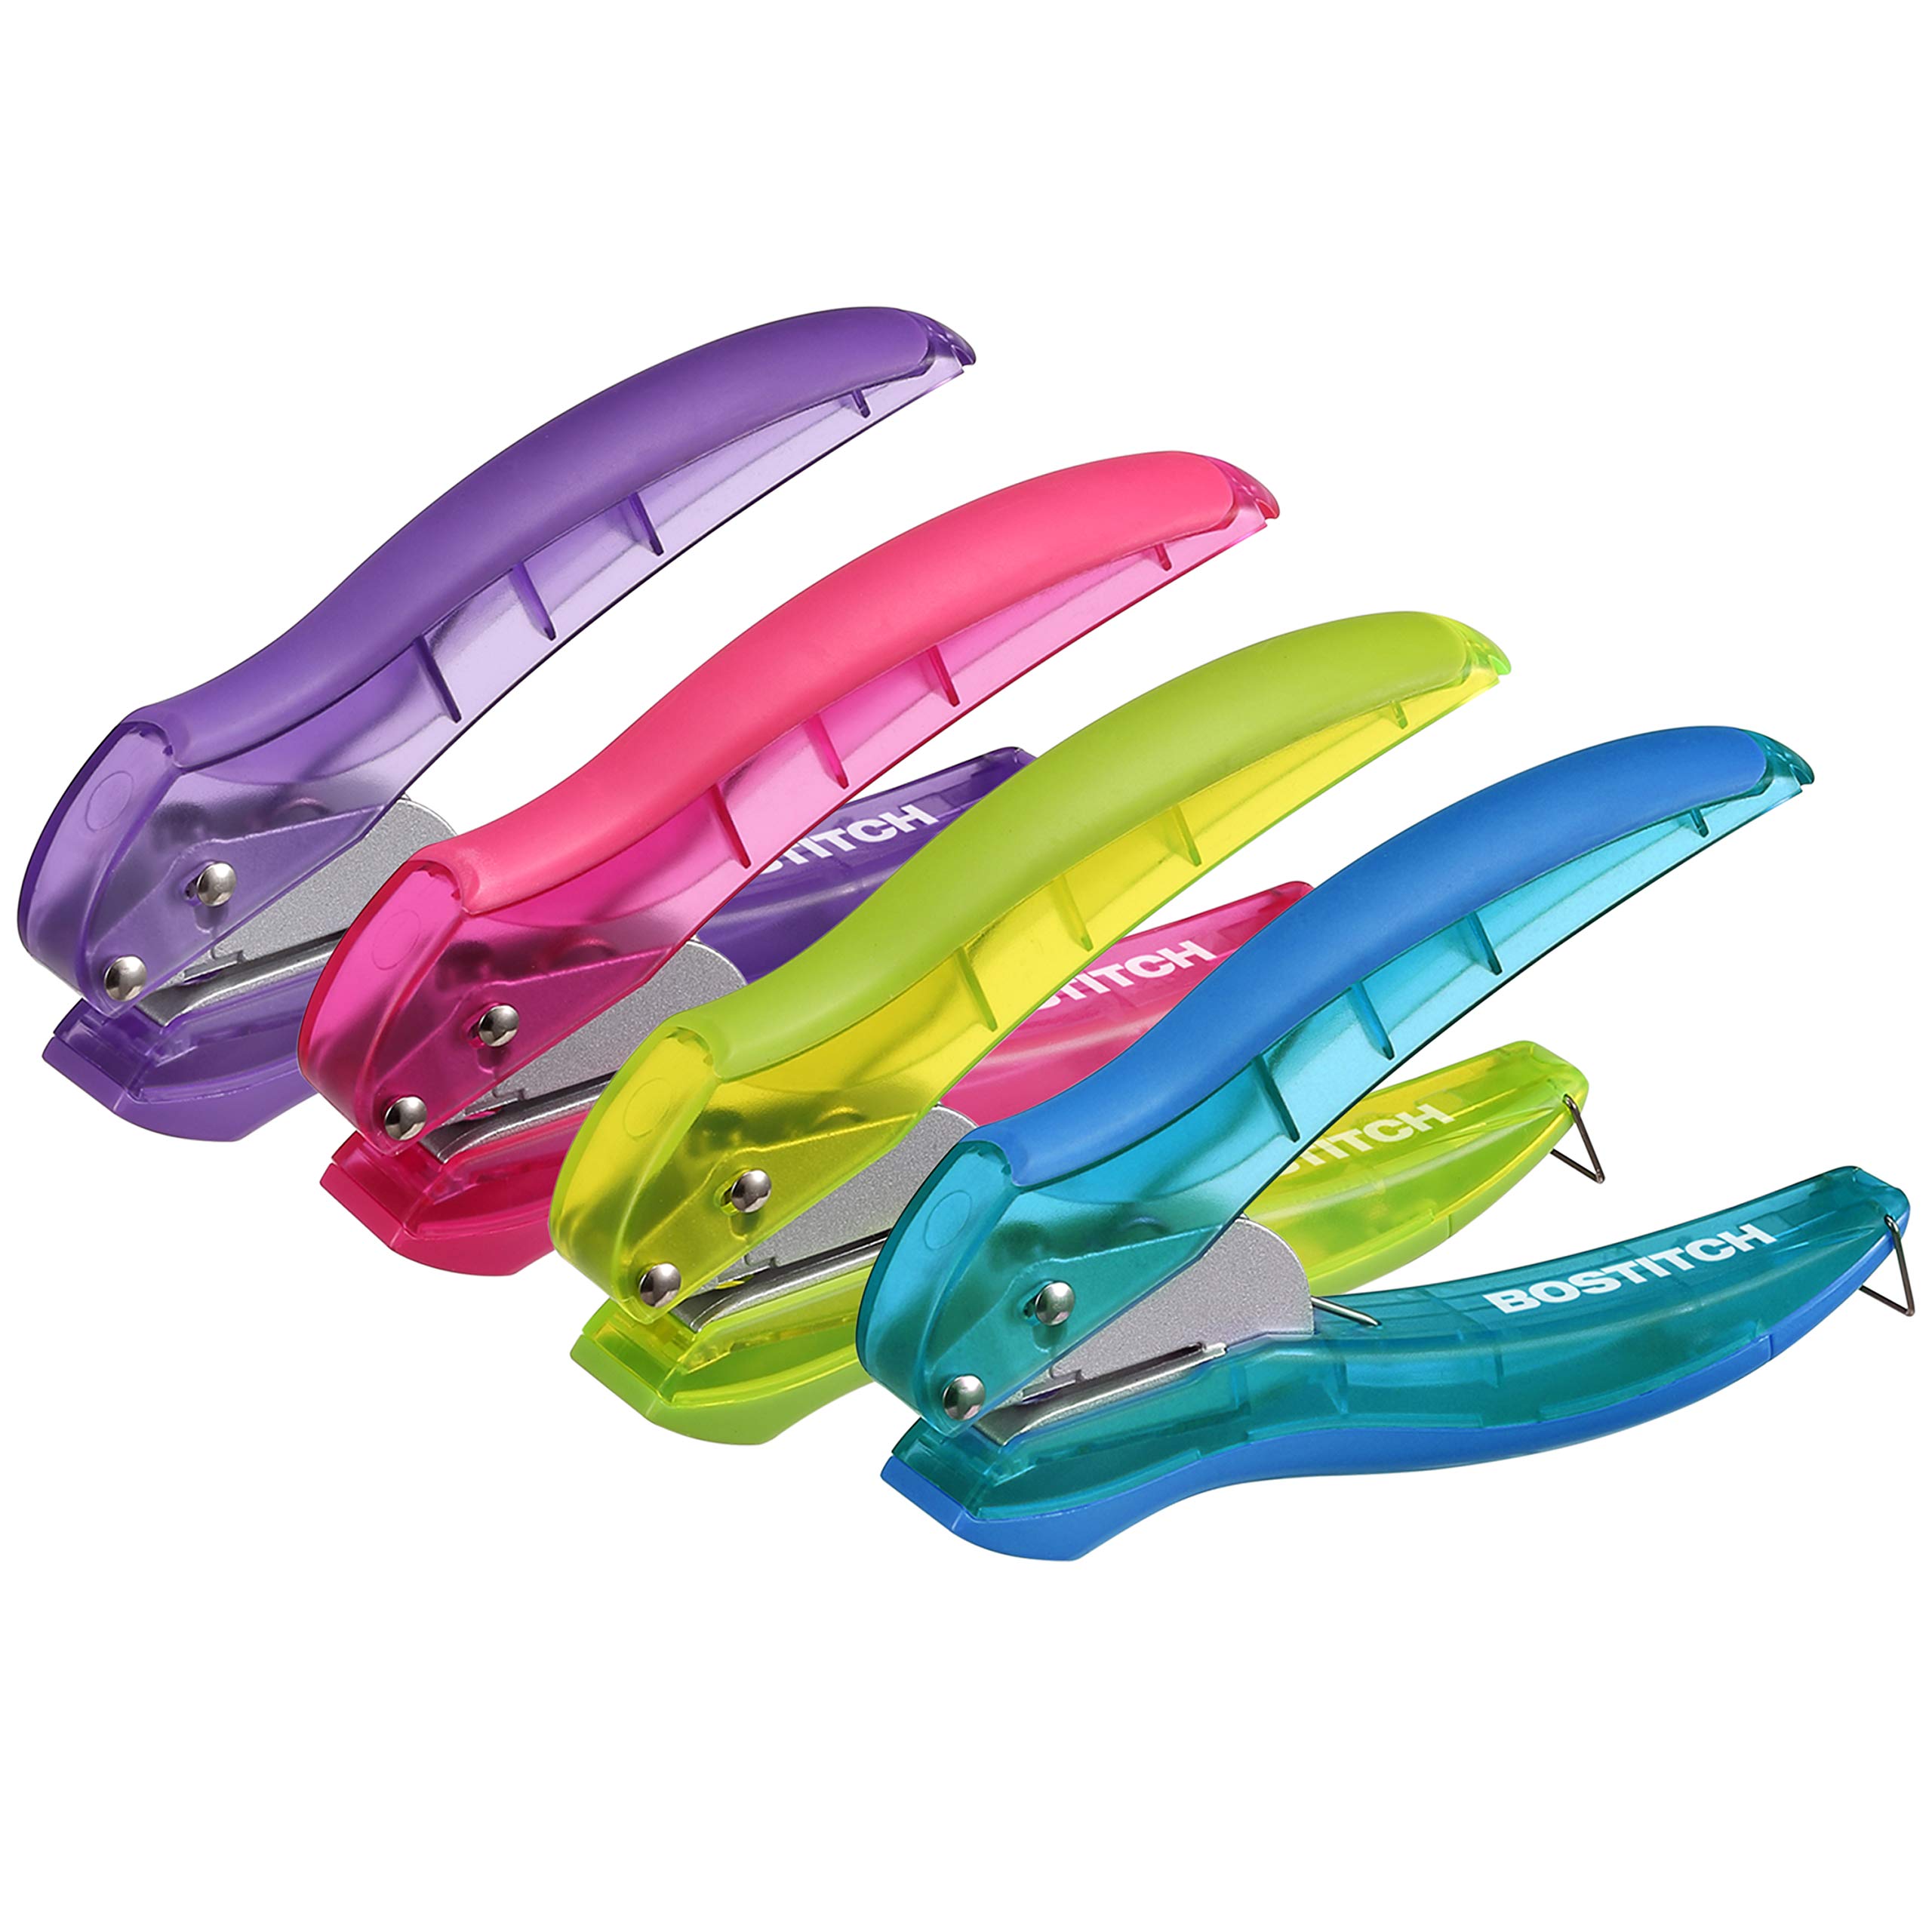 Bostitch inLIGHT Reduced Effort One-Hole Punch One Unit per Package  Assorted Colors No Color Choice (2401) Assorted 1 Hole Punch